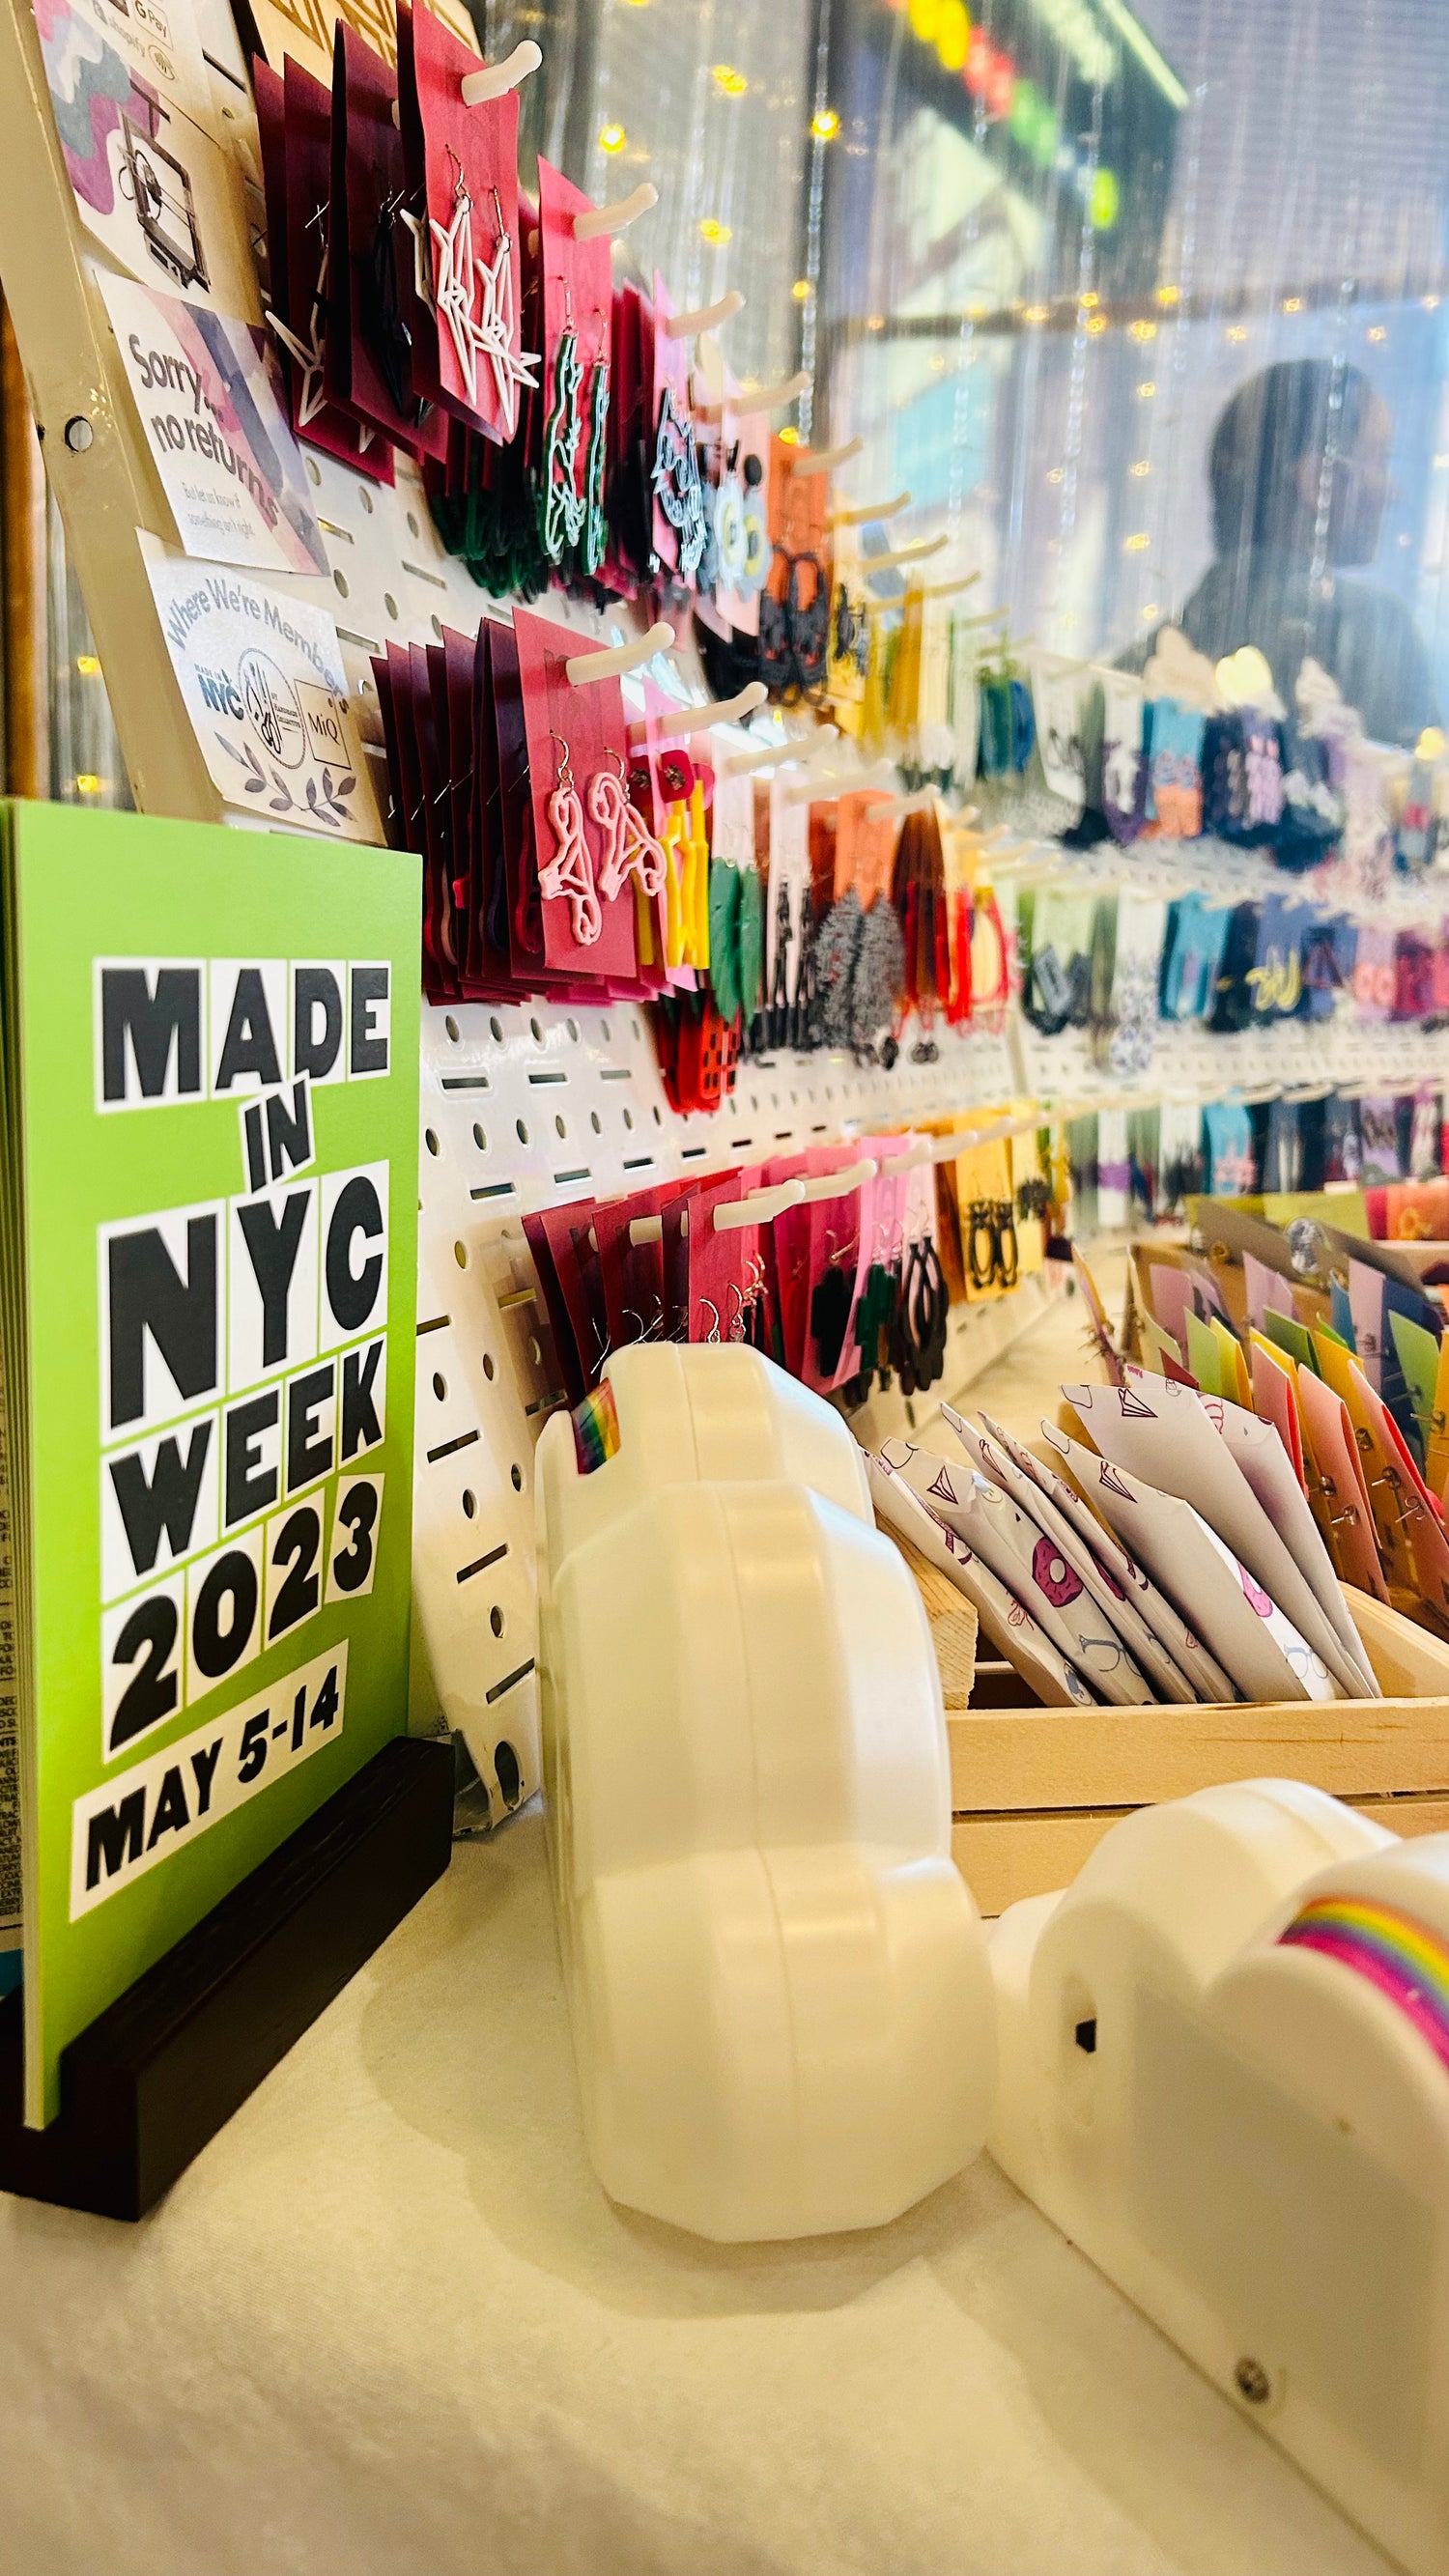 On the edge of a table with a rainbow of hanging earring cards is a bright green card reading Made In NYC Week 2023, which R+D participated in through a partner market.